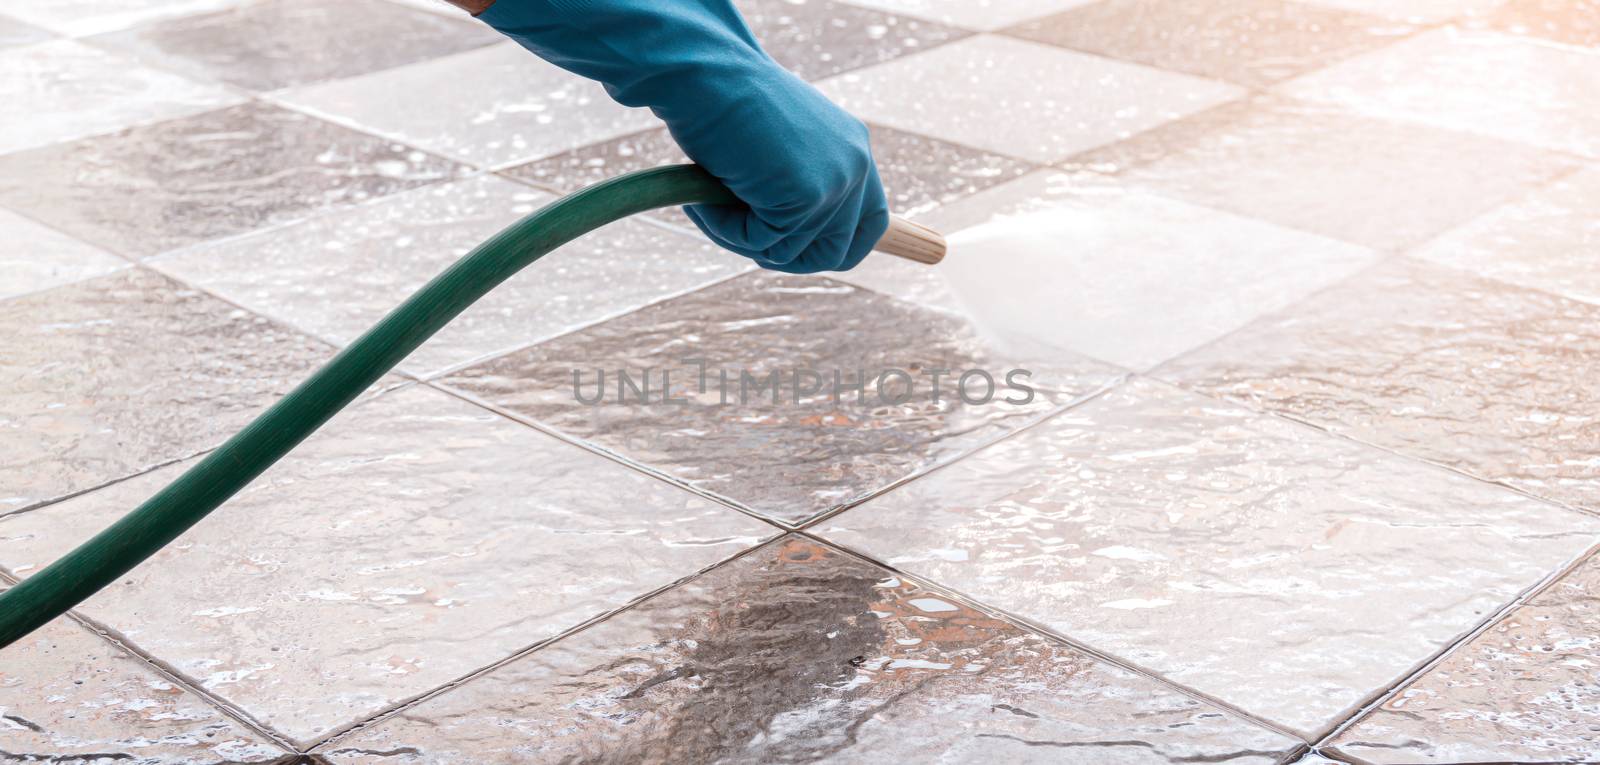 Hand of man wearing blue rubber gloves using a hose to cleaning the tile floor.